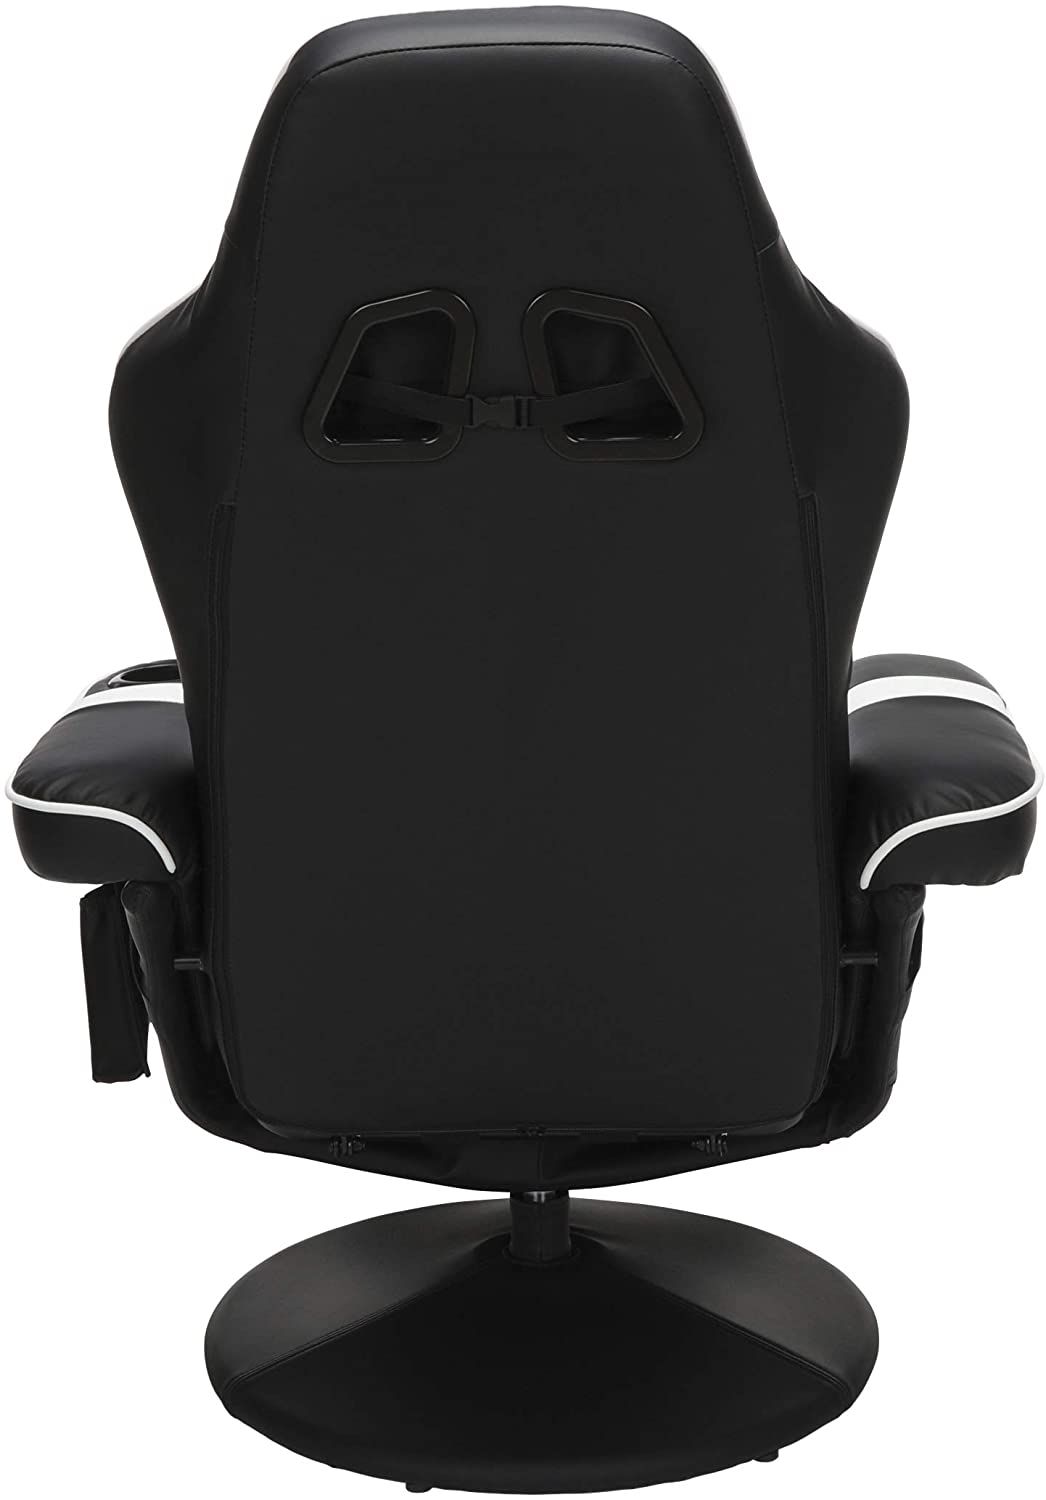 Respawn 900 Gaming Chair back view